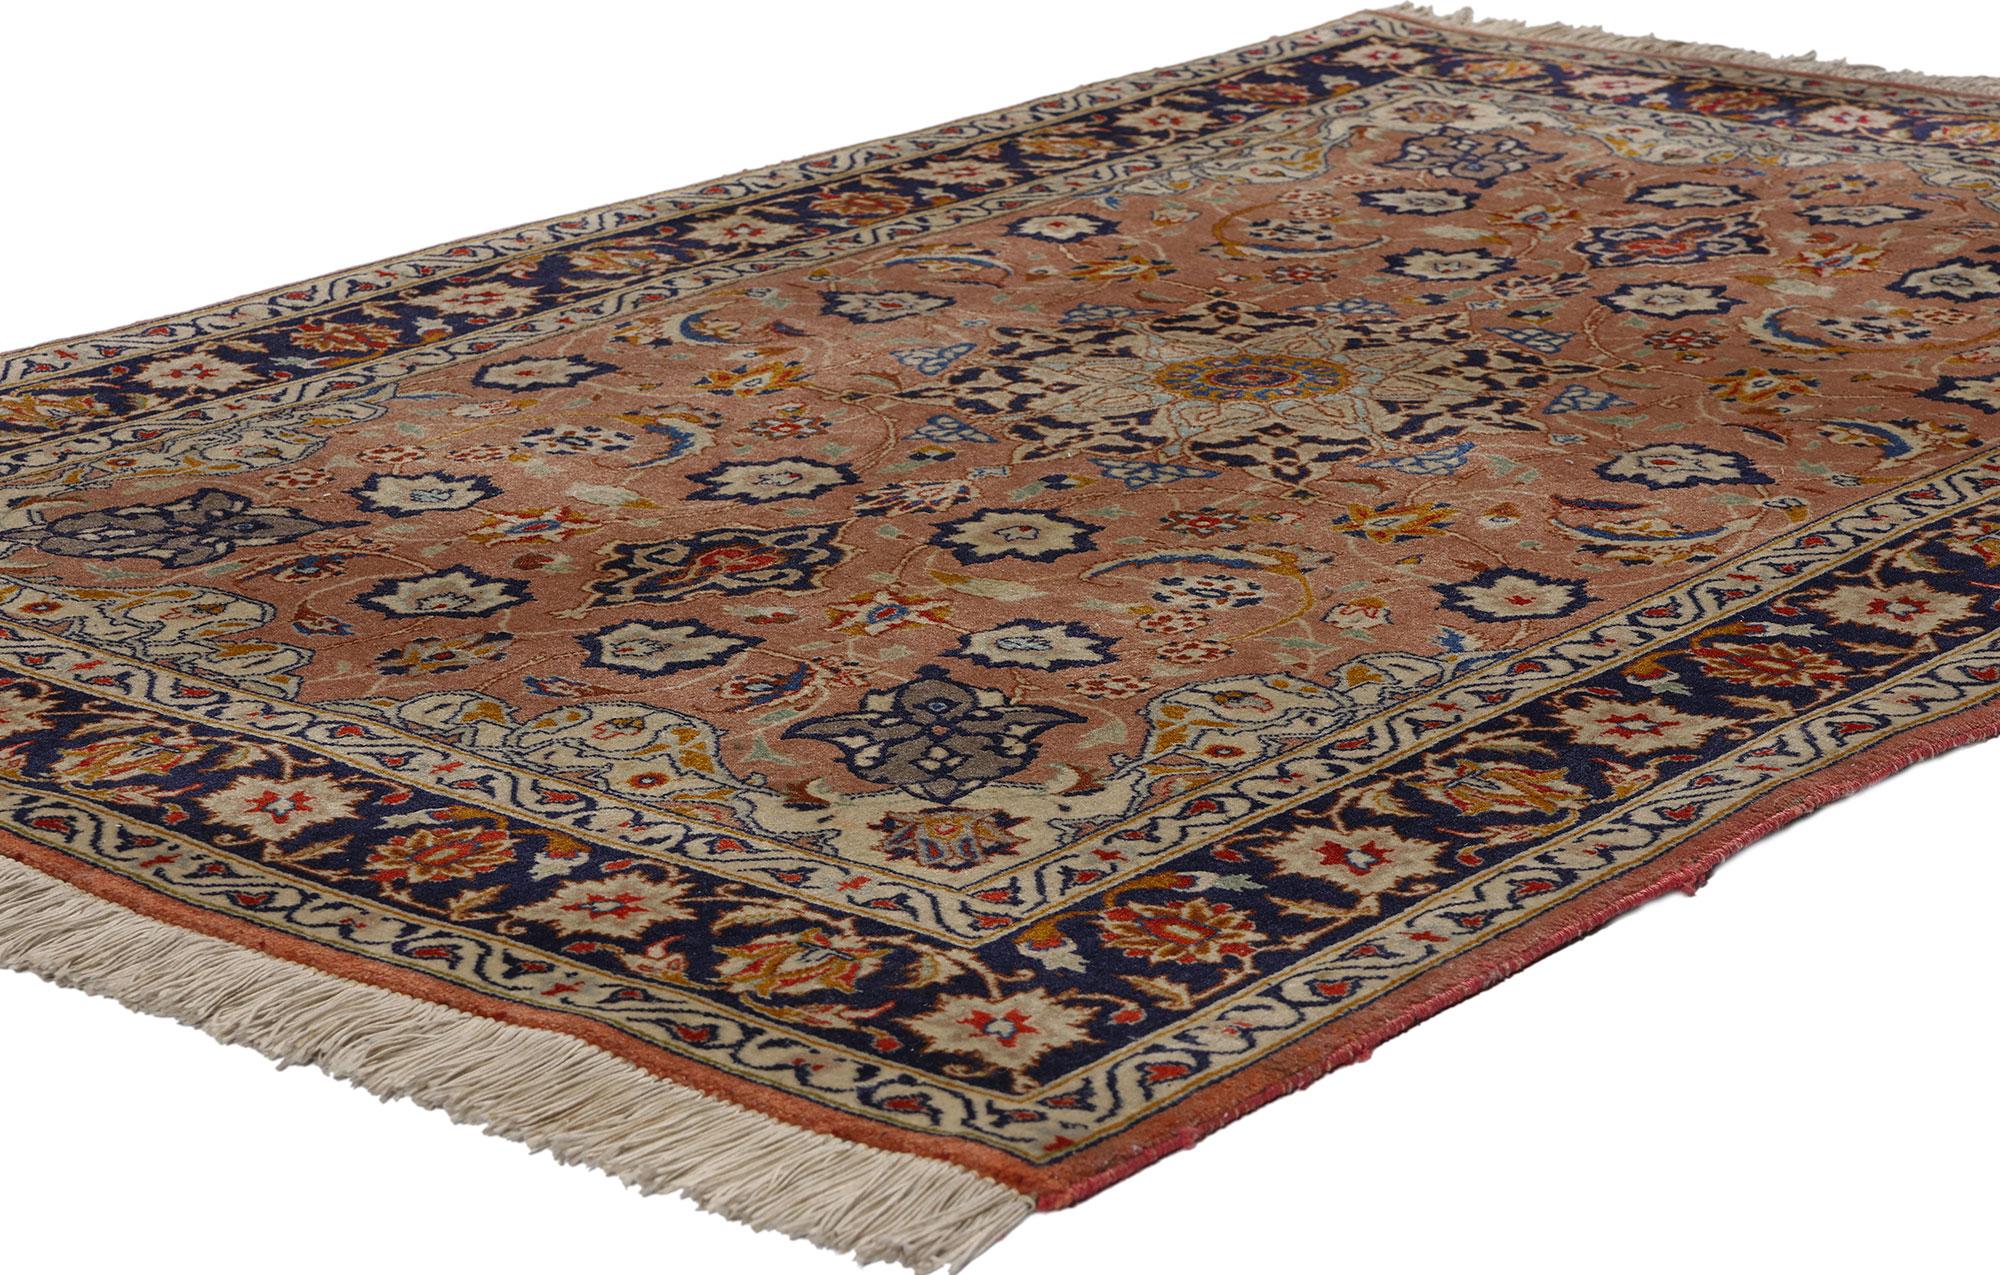 78702 Small Vintage Persian Tabriz Rug, 03'05 x 05'01. Please note this listing is for one piece. There is a matching piece available adds to its rarity. Persian Tabriz rugs, originating from the ancient city of Tabriz in northwestern Iran, embody